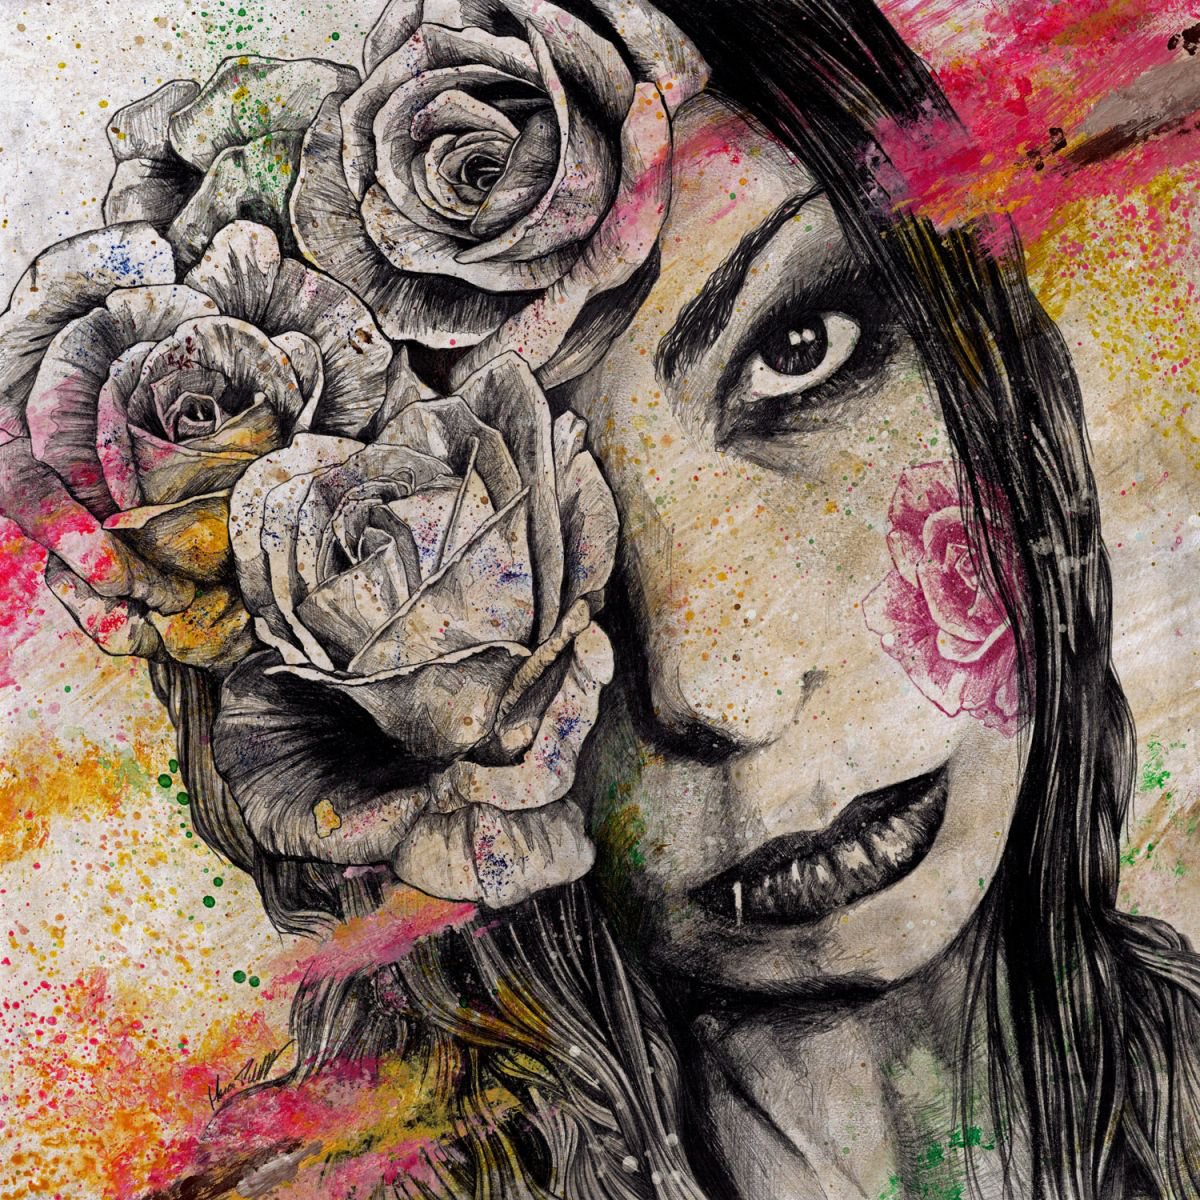 OF SUFFERING - (gothic flower girl portrait, roses pencil drawing, dark street art illustr... by Marco Paludet